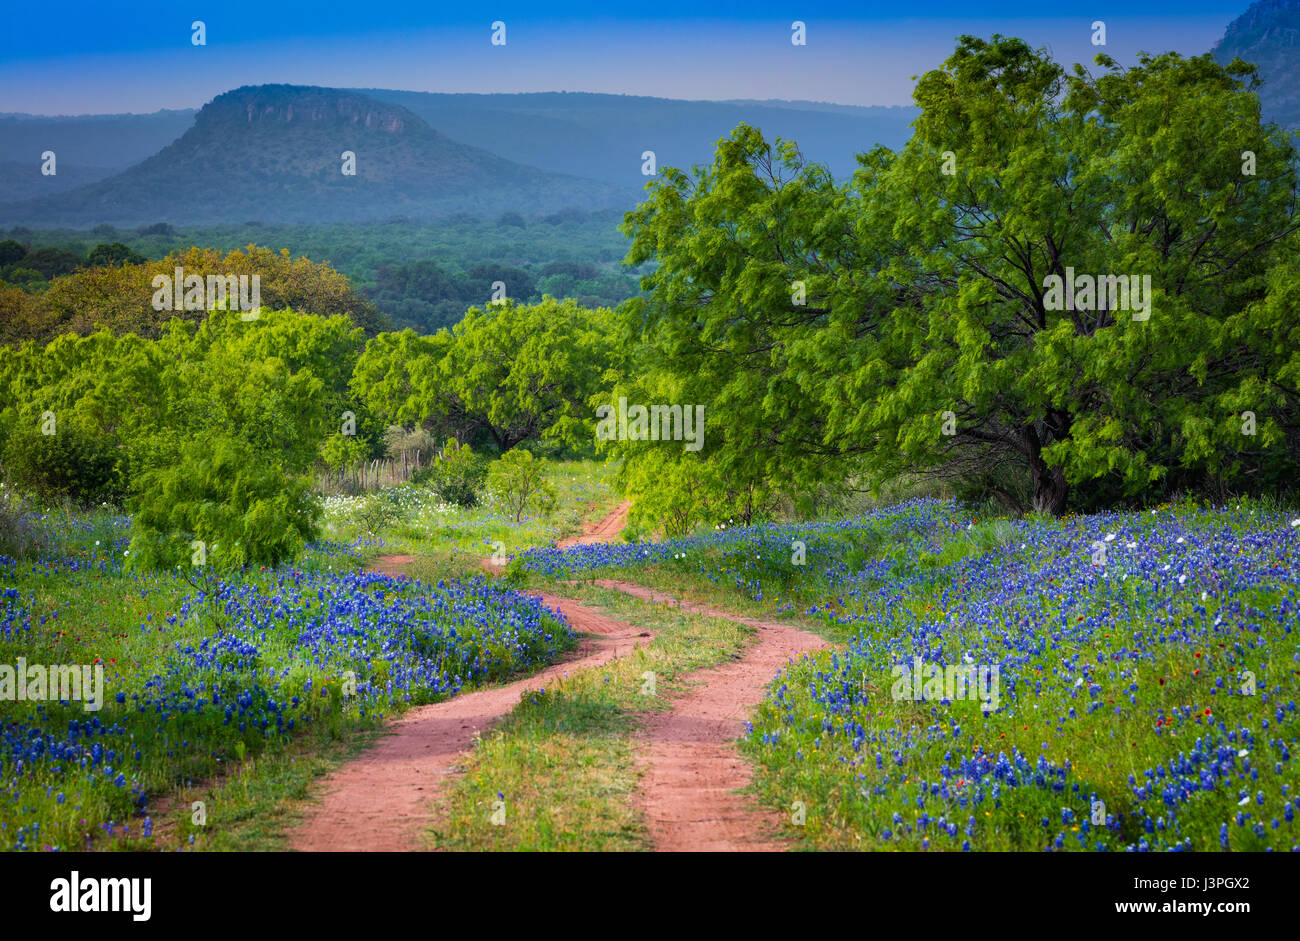 Bluebonnets along country road in the Texas Hill Country around Llano. Lupinus texensis, the Texas bluebonnet, is a species of lupine endemic to Texas Stock Photo